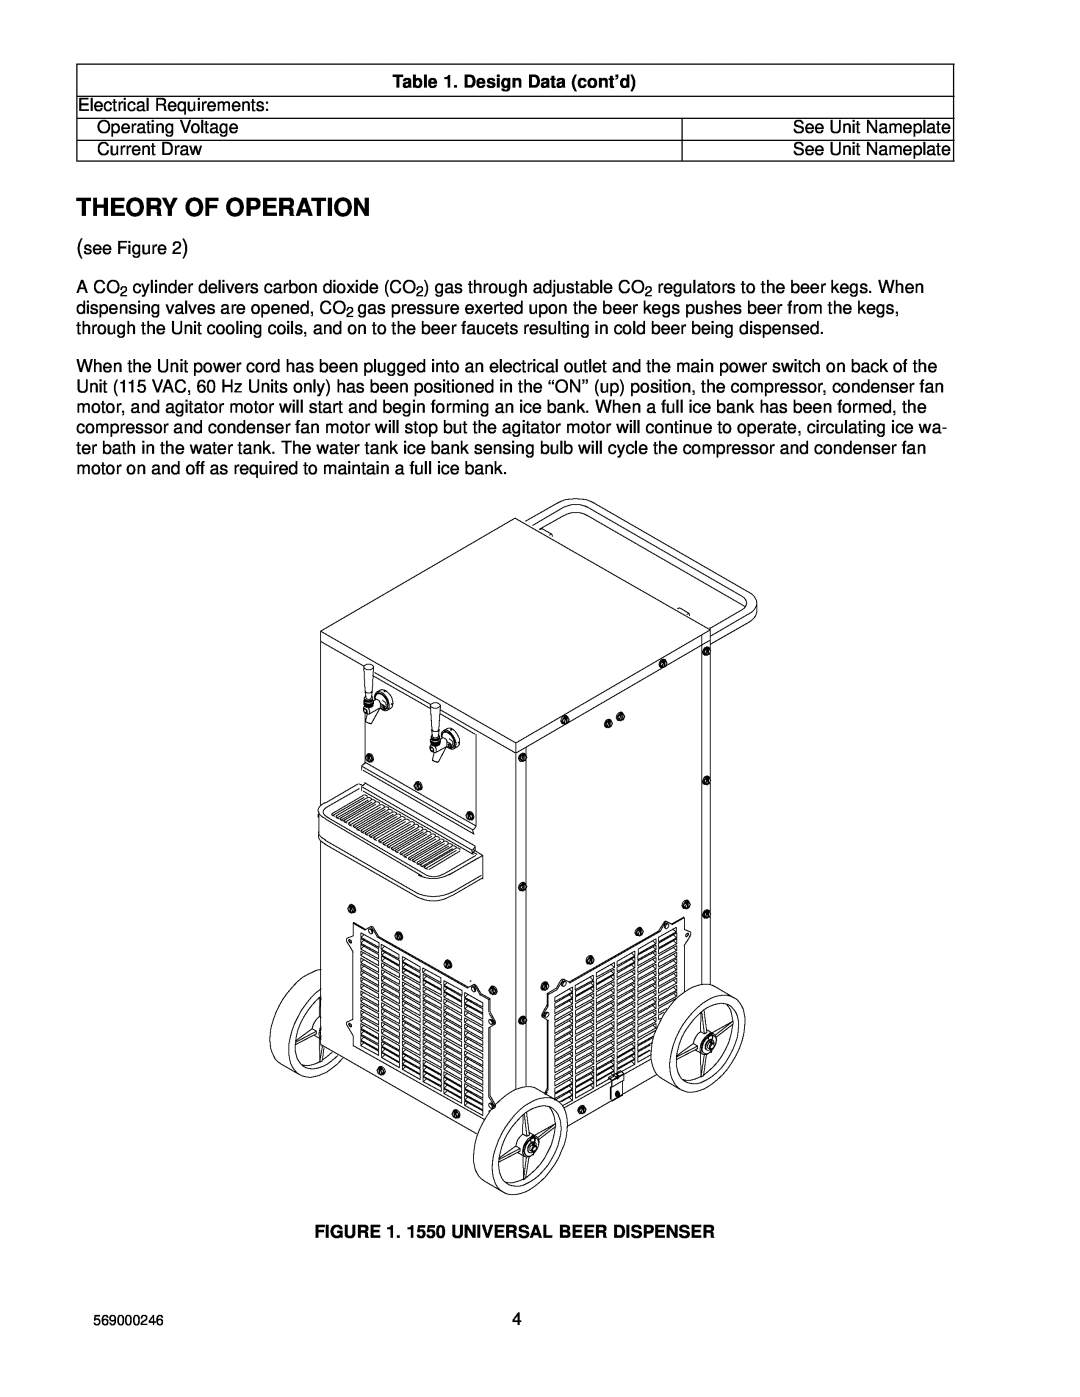 Cornelius installation manual Theory Of Operation, Design Data cont’d, 1550 UNIVERSAL BEER DISPENSER 